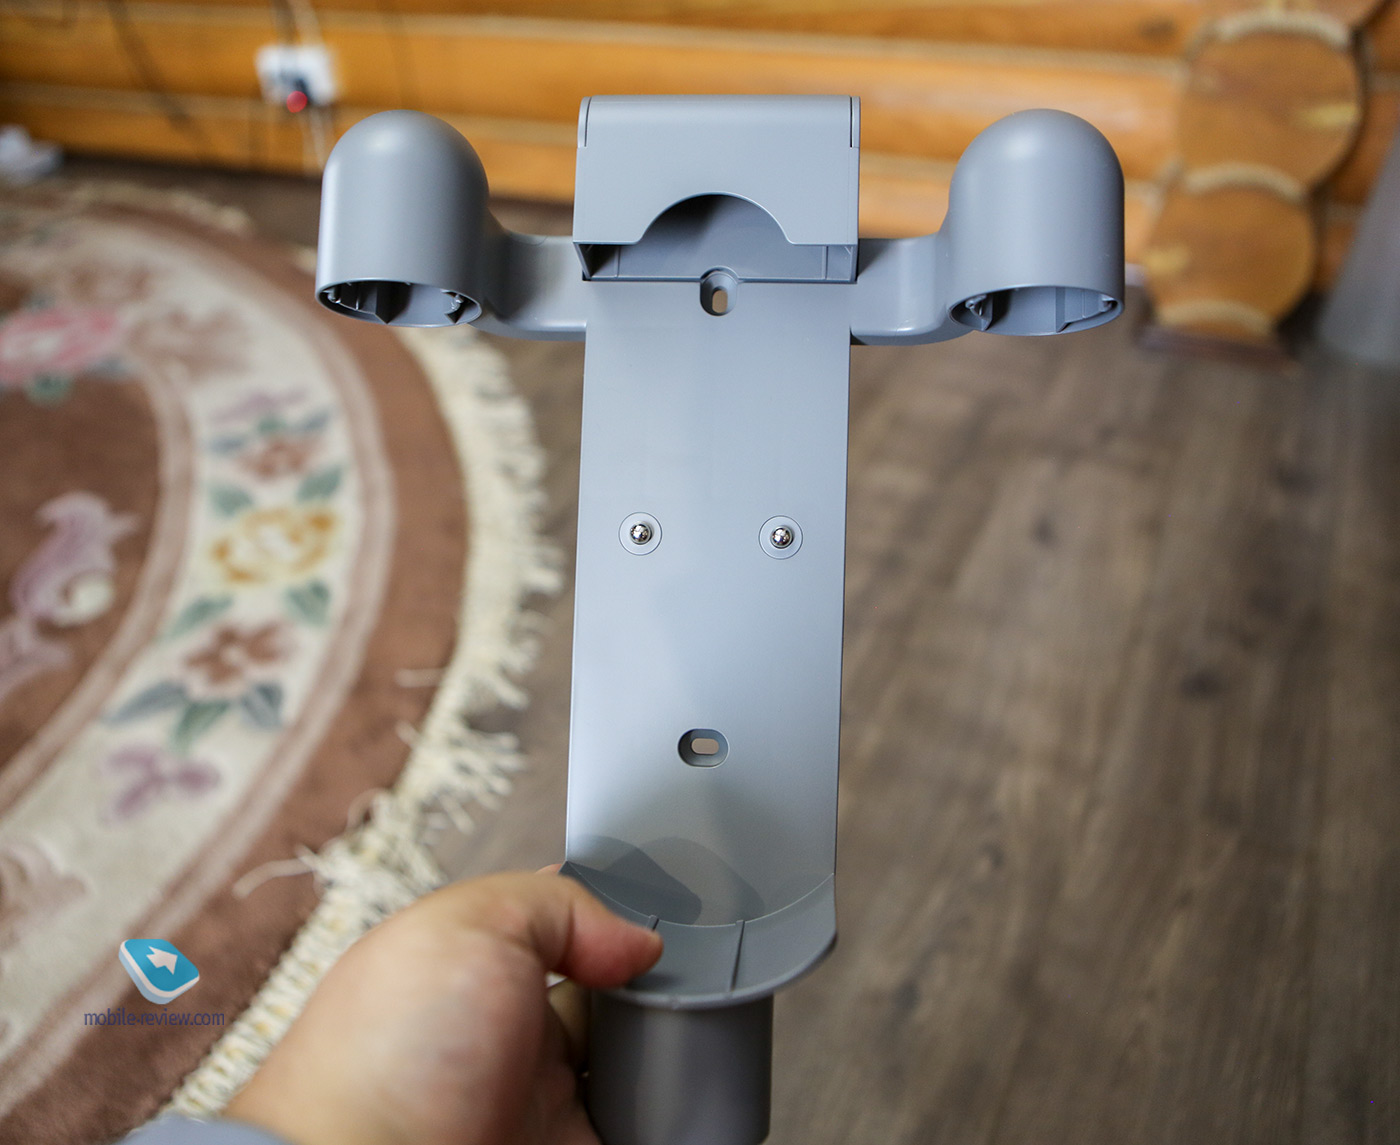 Review of Xiaomi Dreame V11 cordless vacuum cleaner